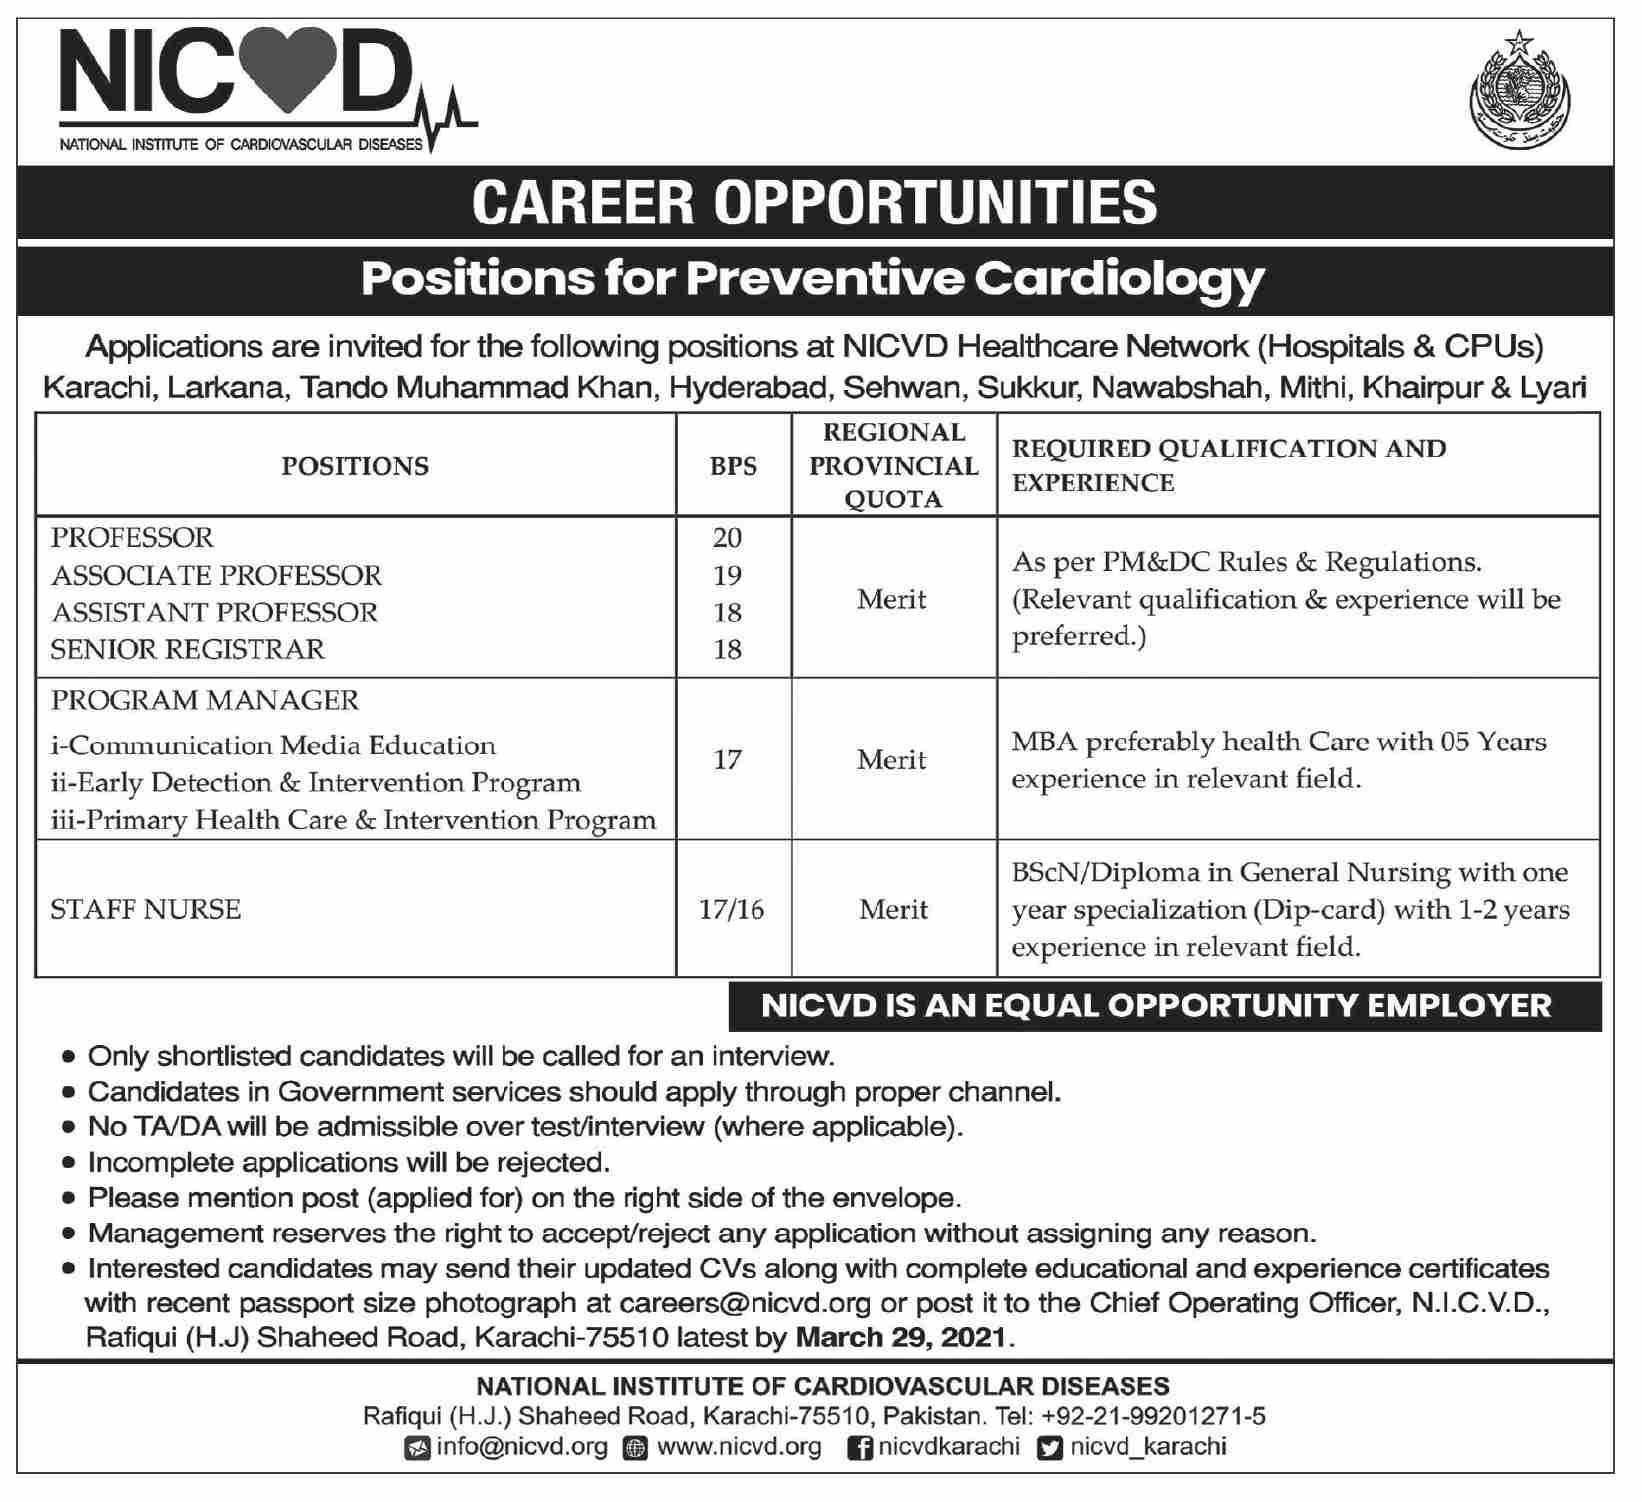 Latest Govt Jobs in National Institute of Cardiovascular Diseases for Professor & Staff Nurse